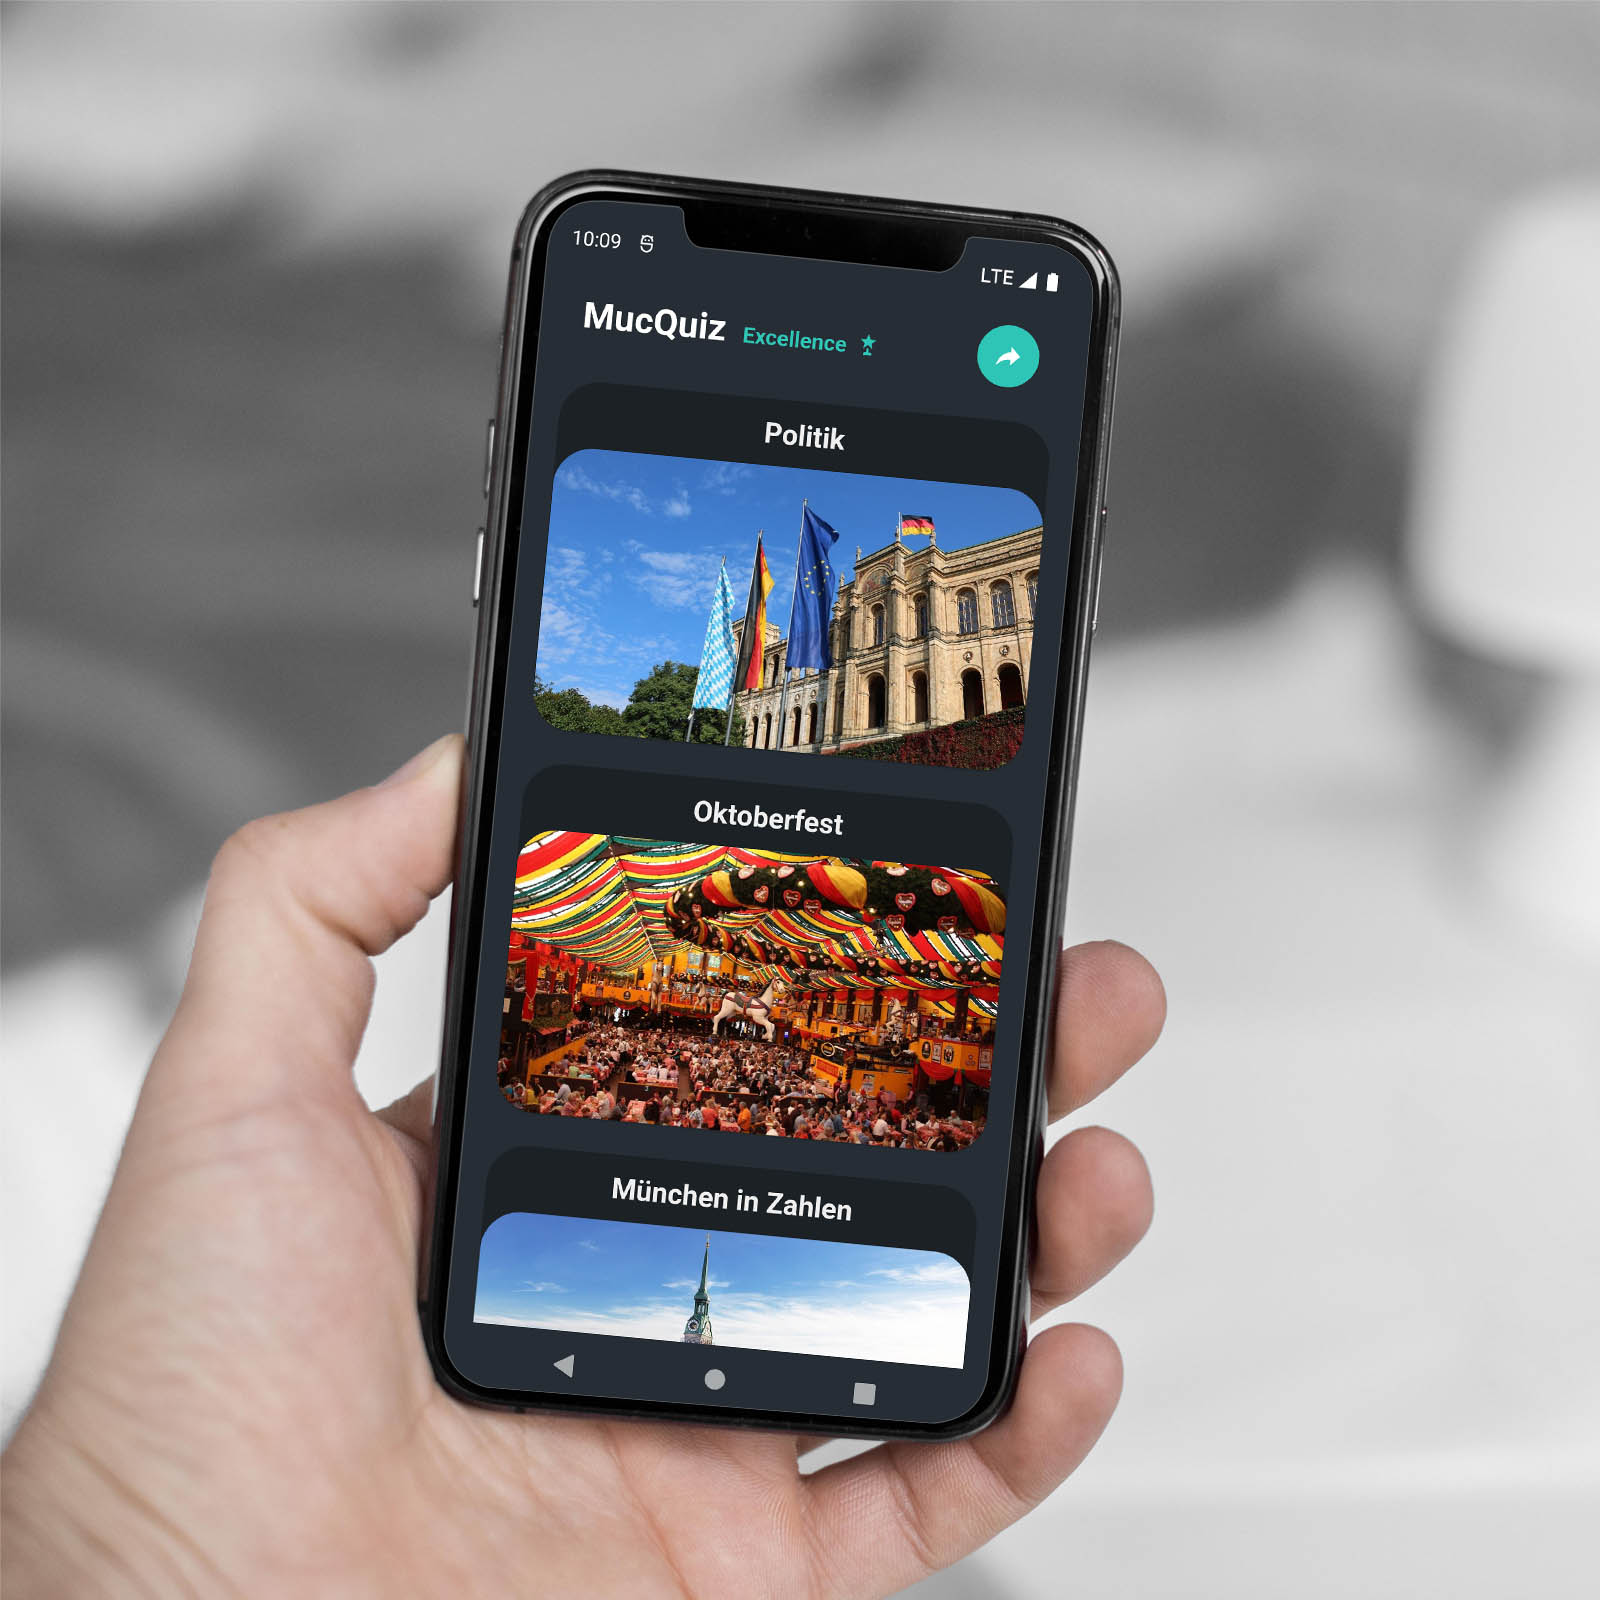 A flutter quiz app that helps you learn about the City of Munich